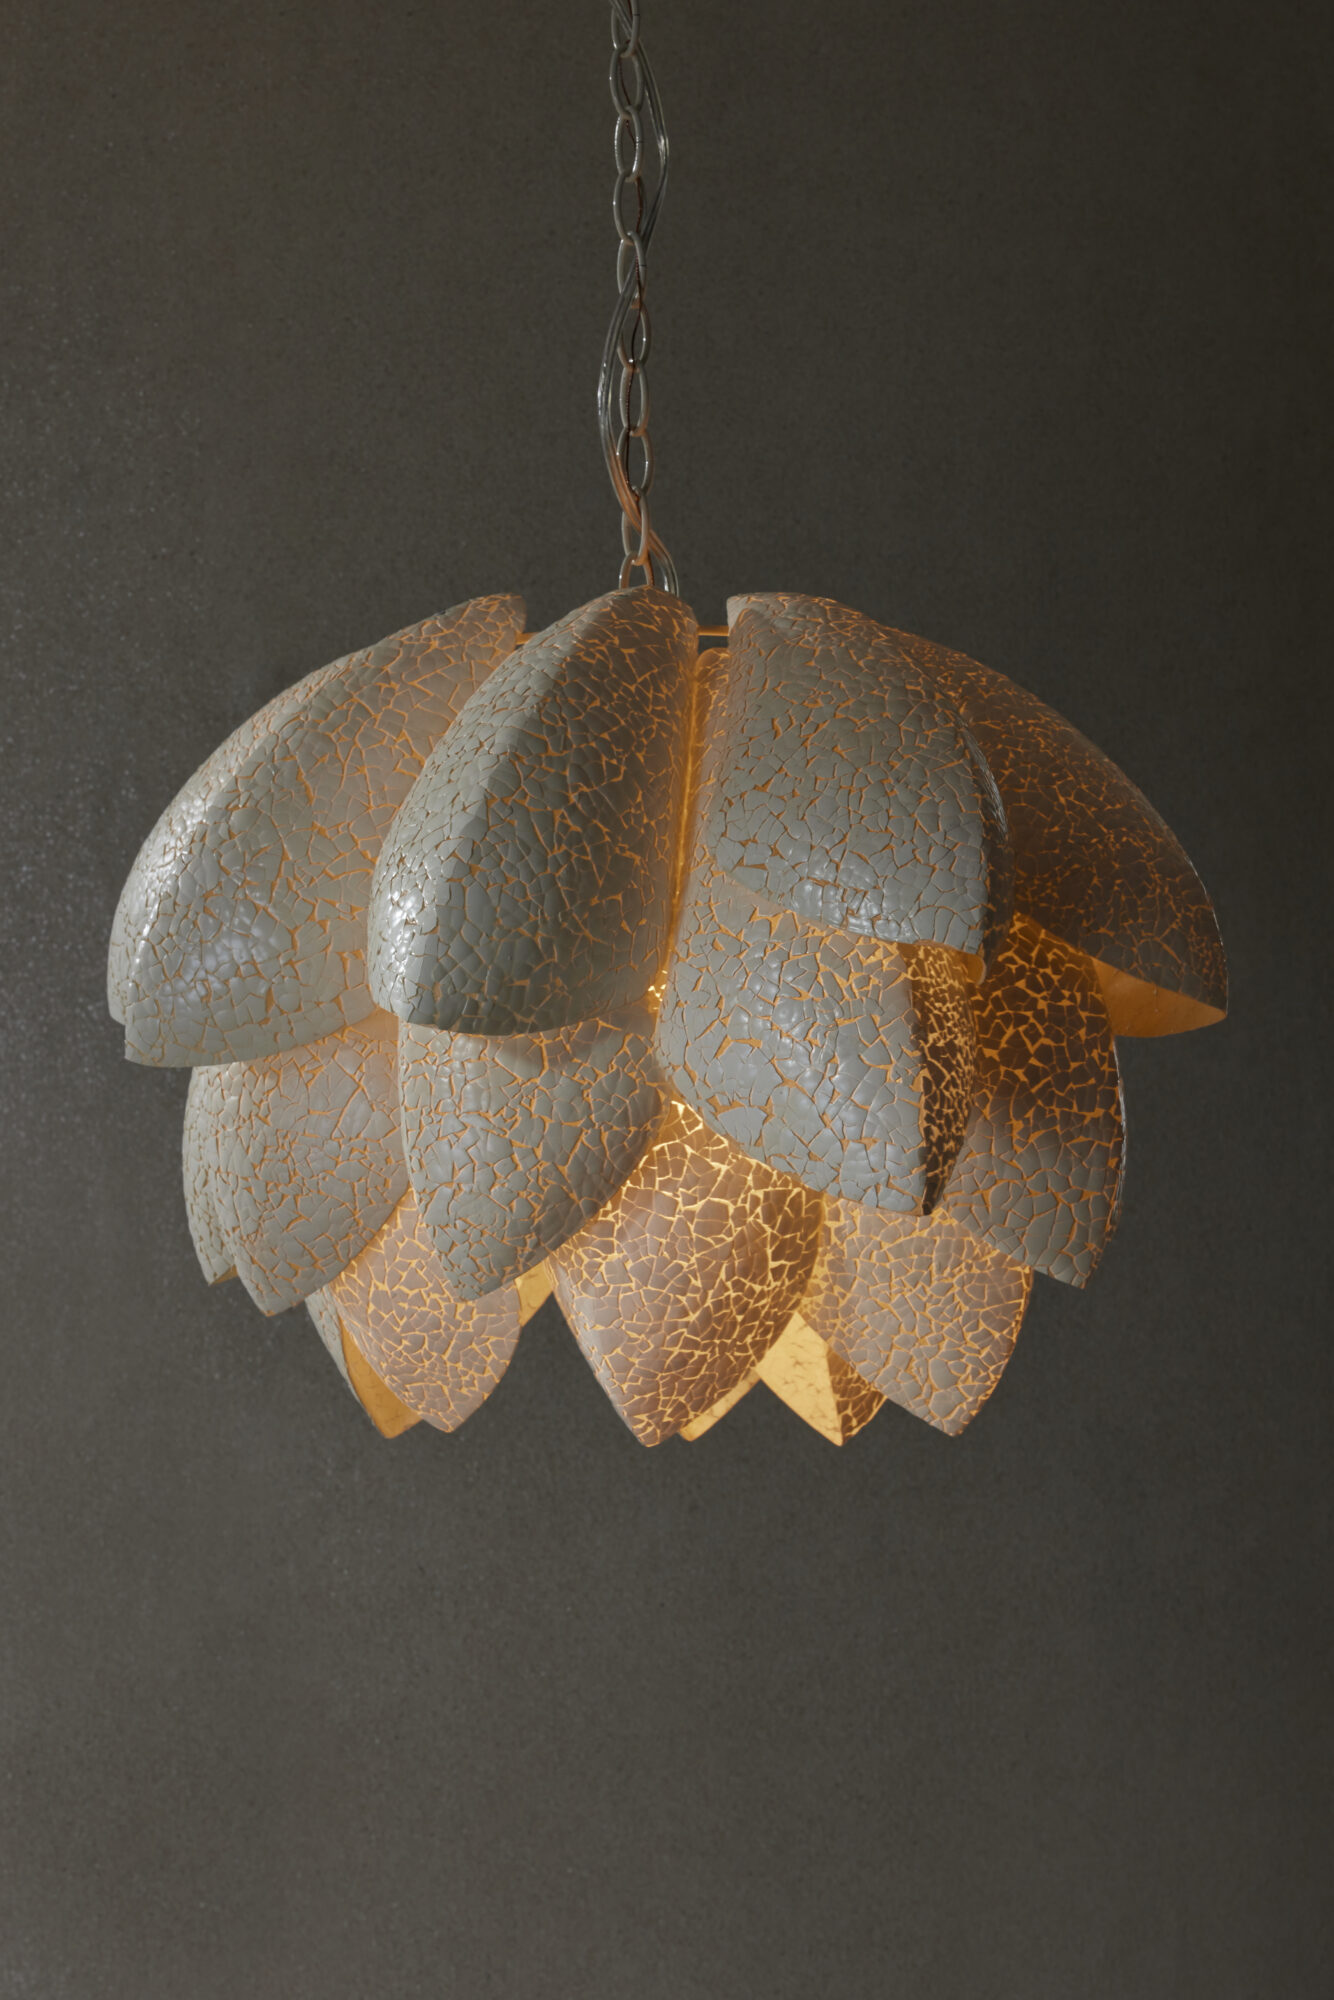 Glowing light fixture with eggshell detail